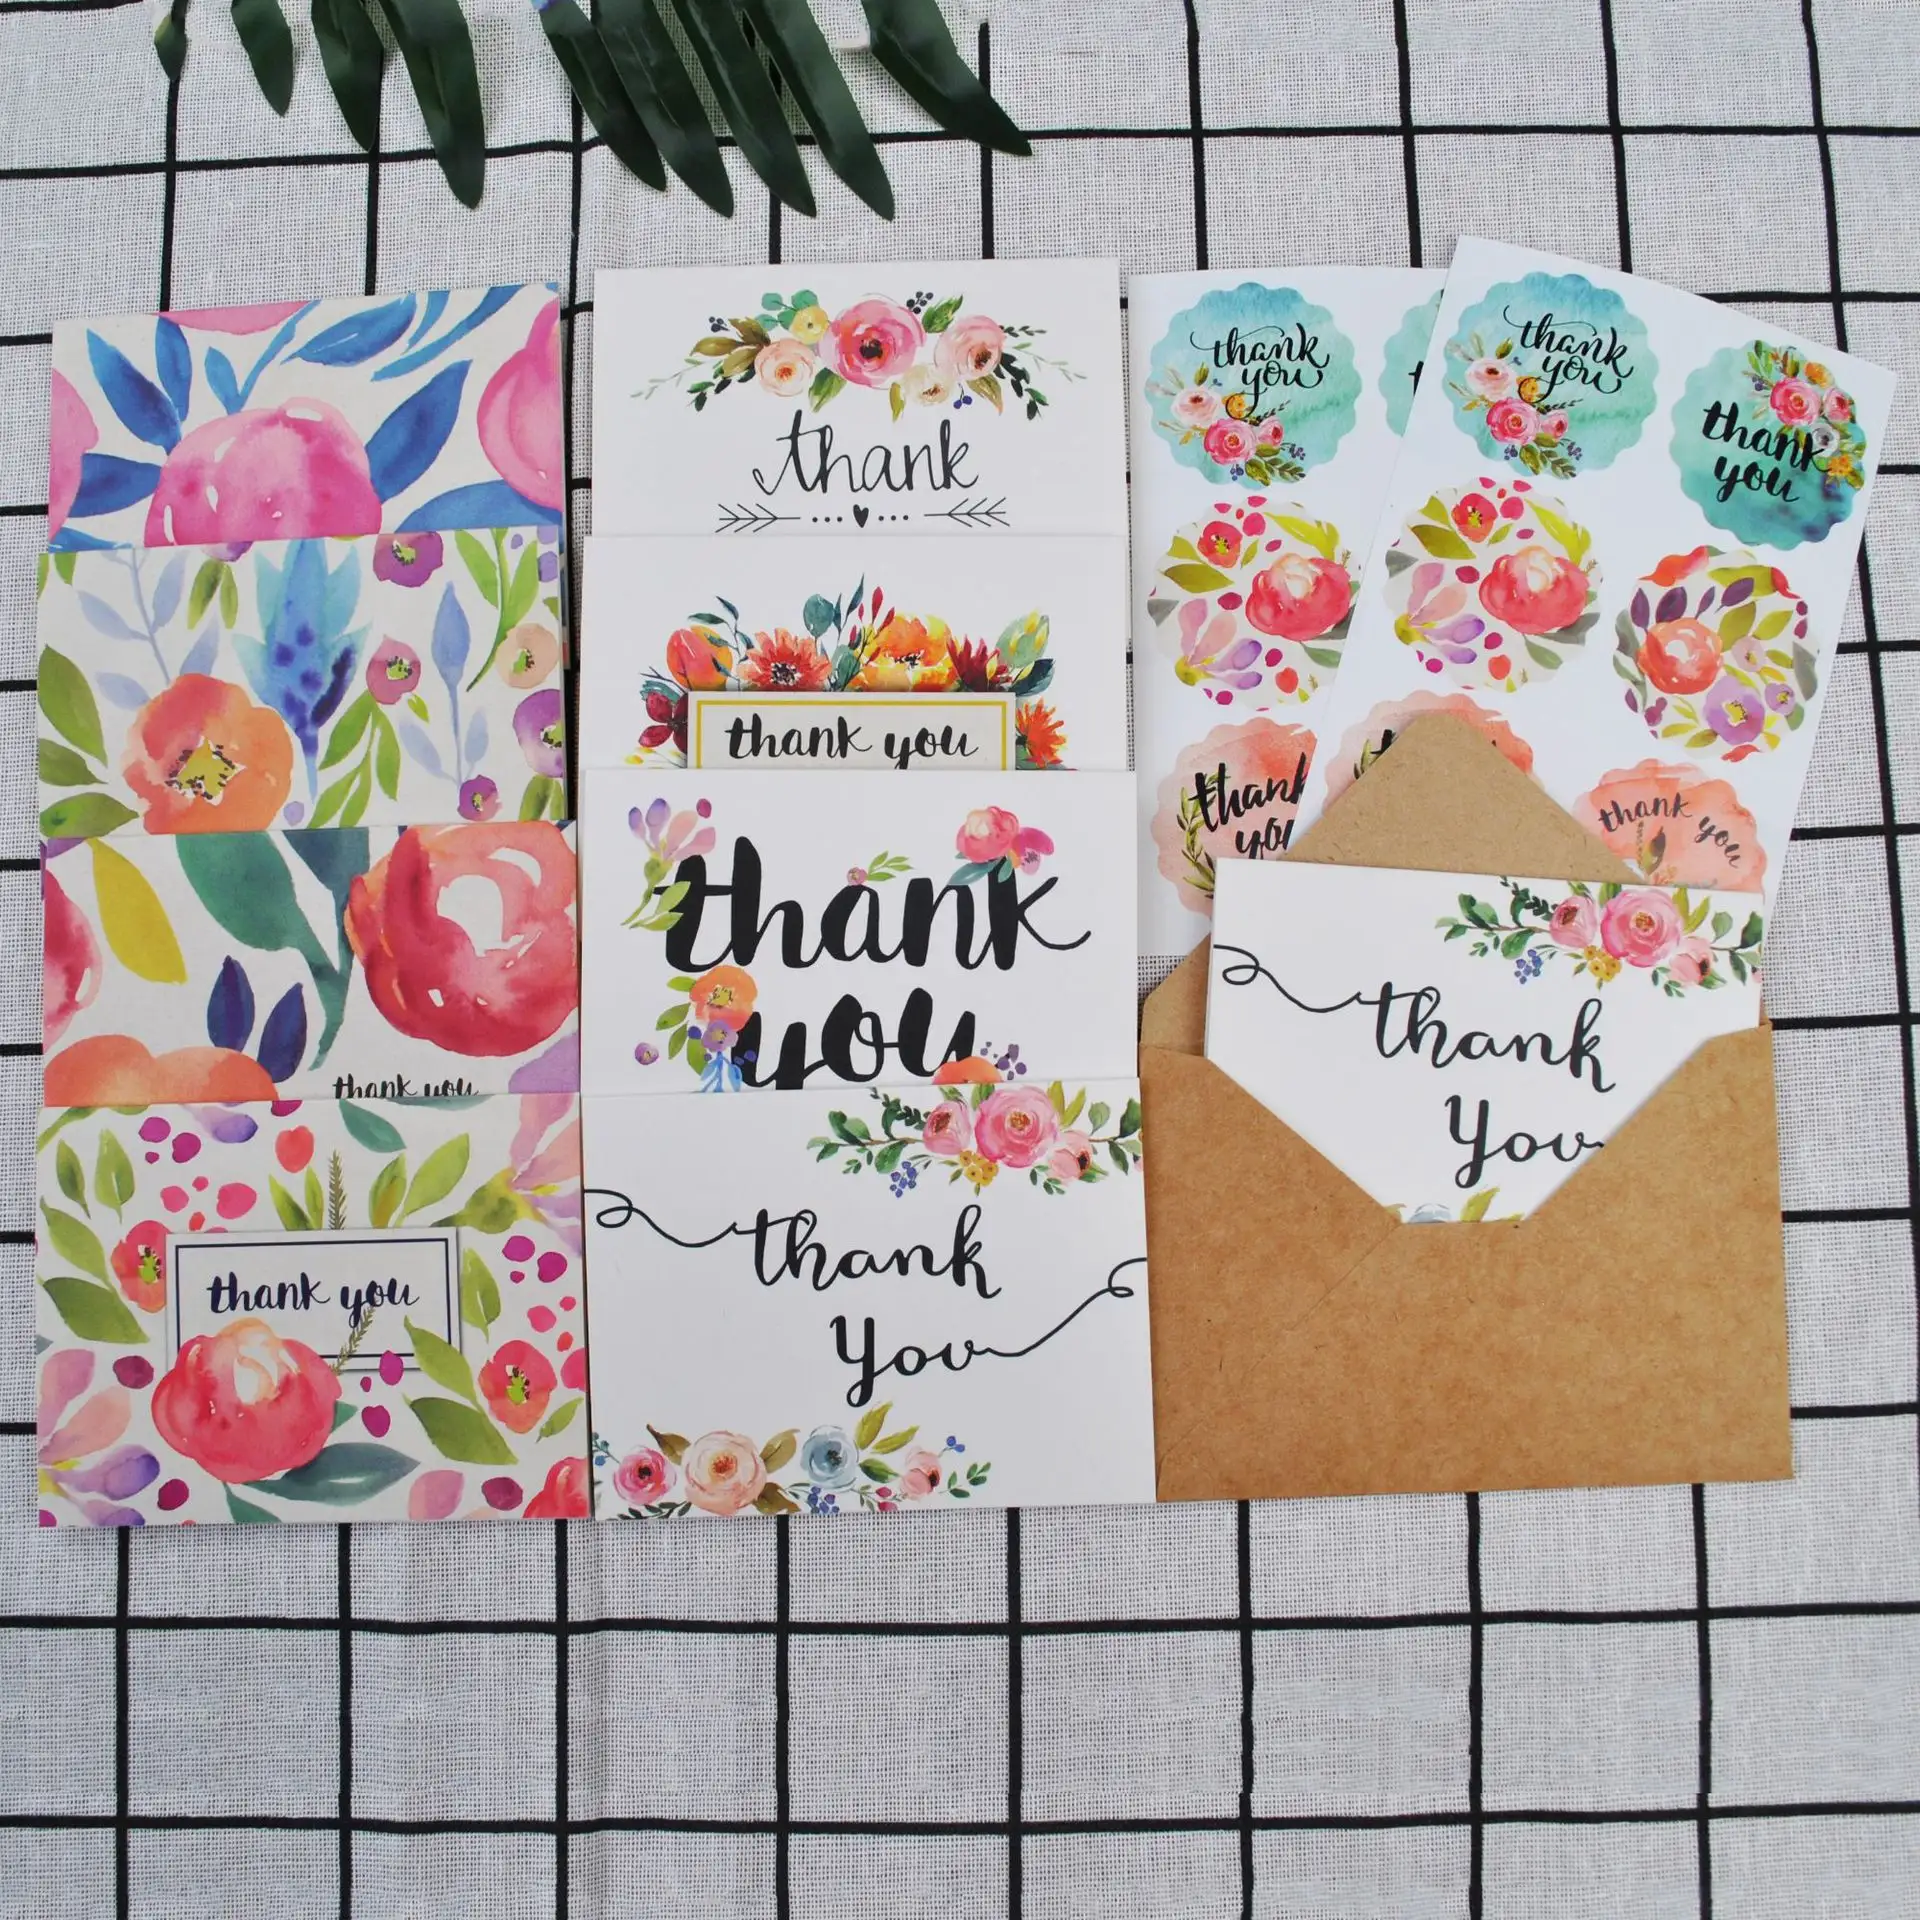 Free Shipping 8pcs Thank You Cards with Envelopes Appreciate Cards Greeting Postcard Kraft Paper 8pcs Pack per Unit